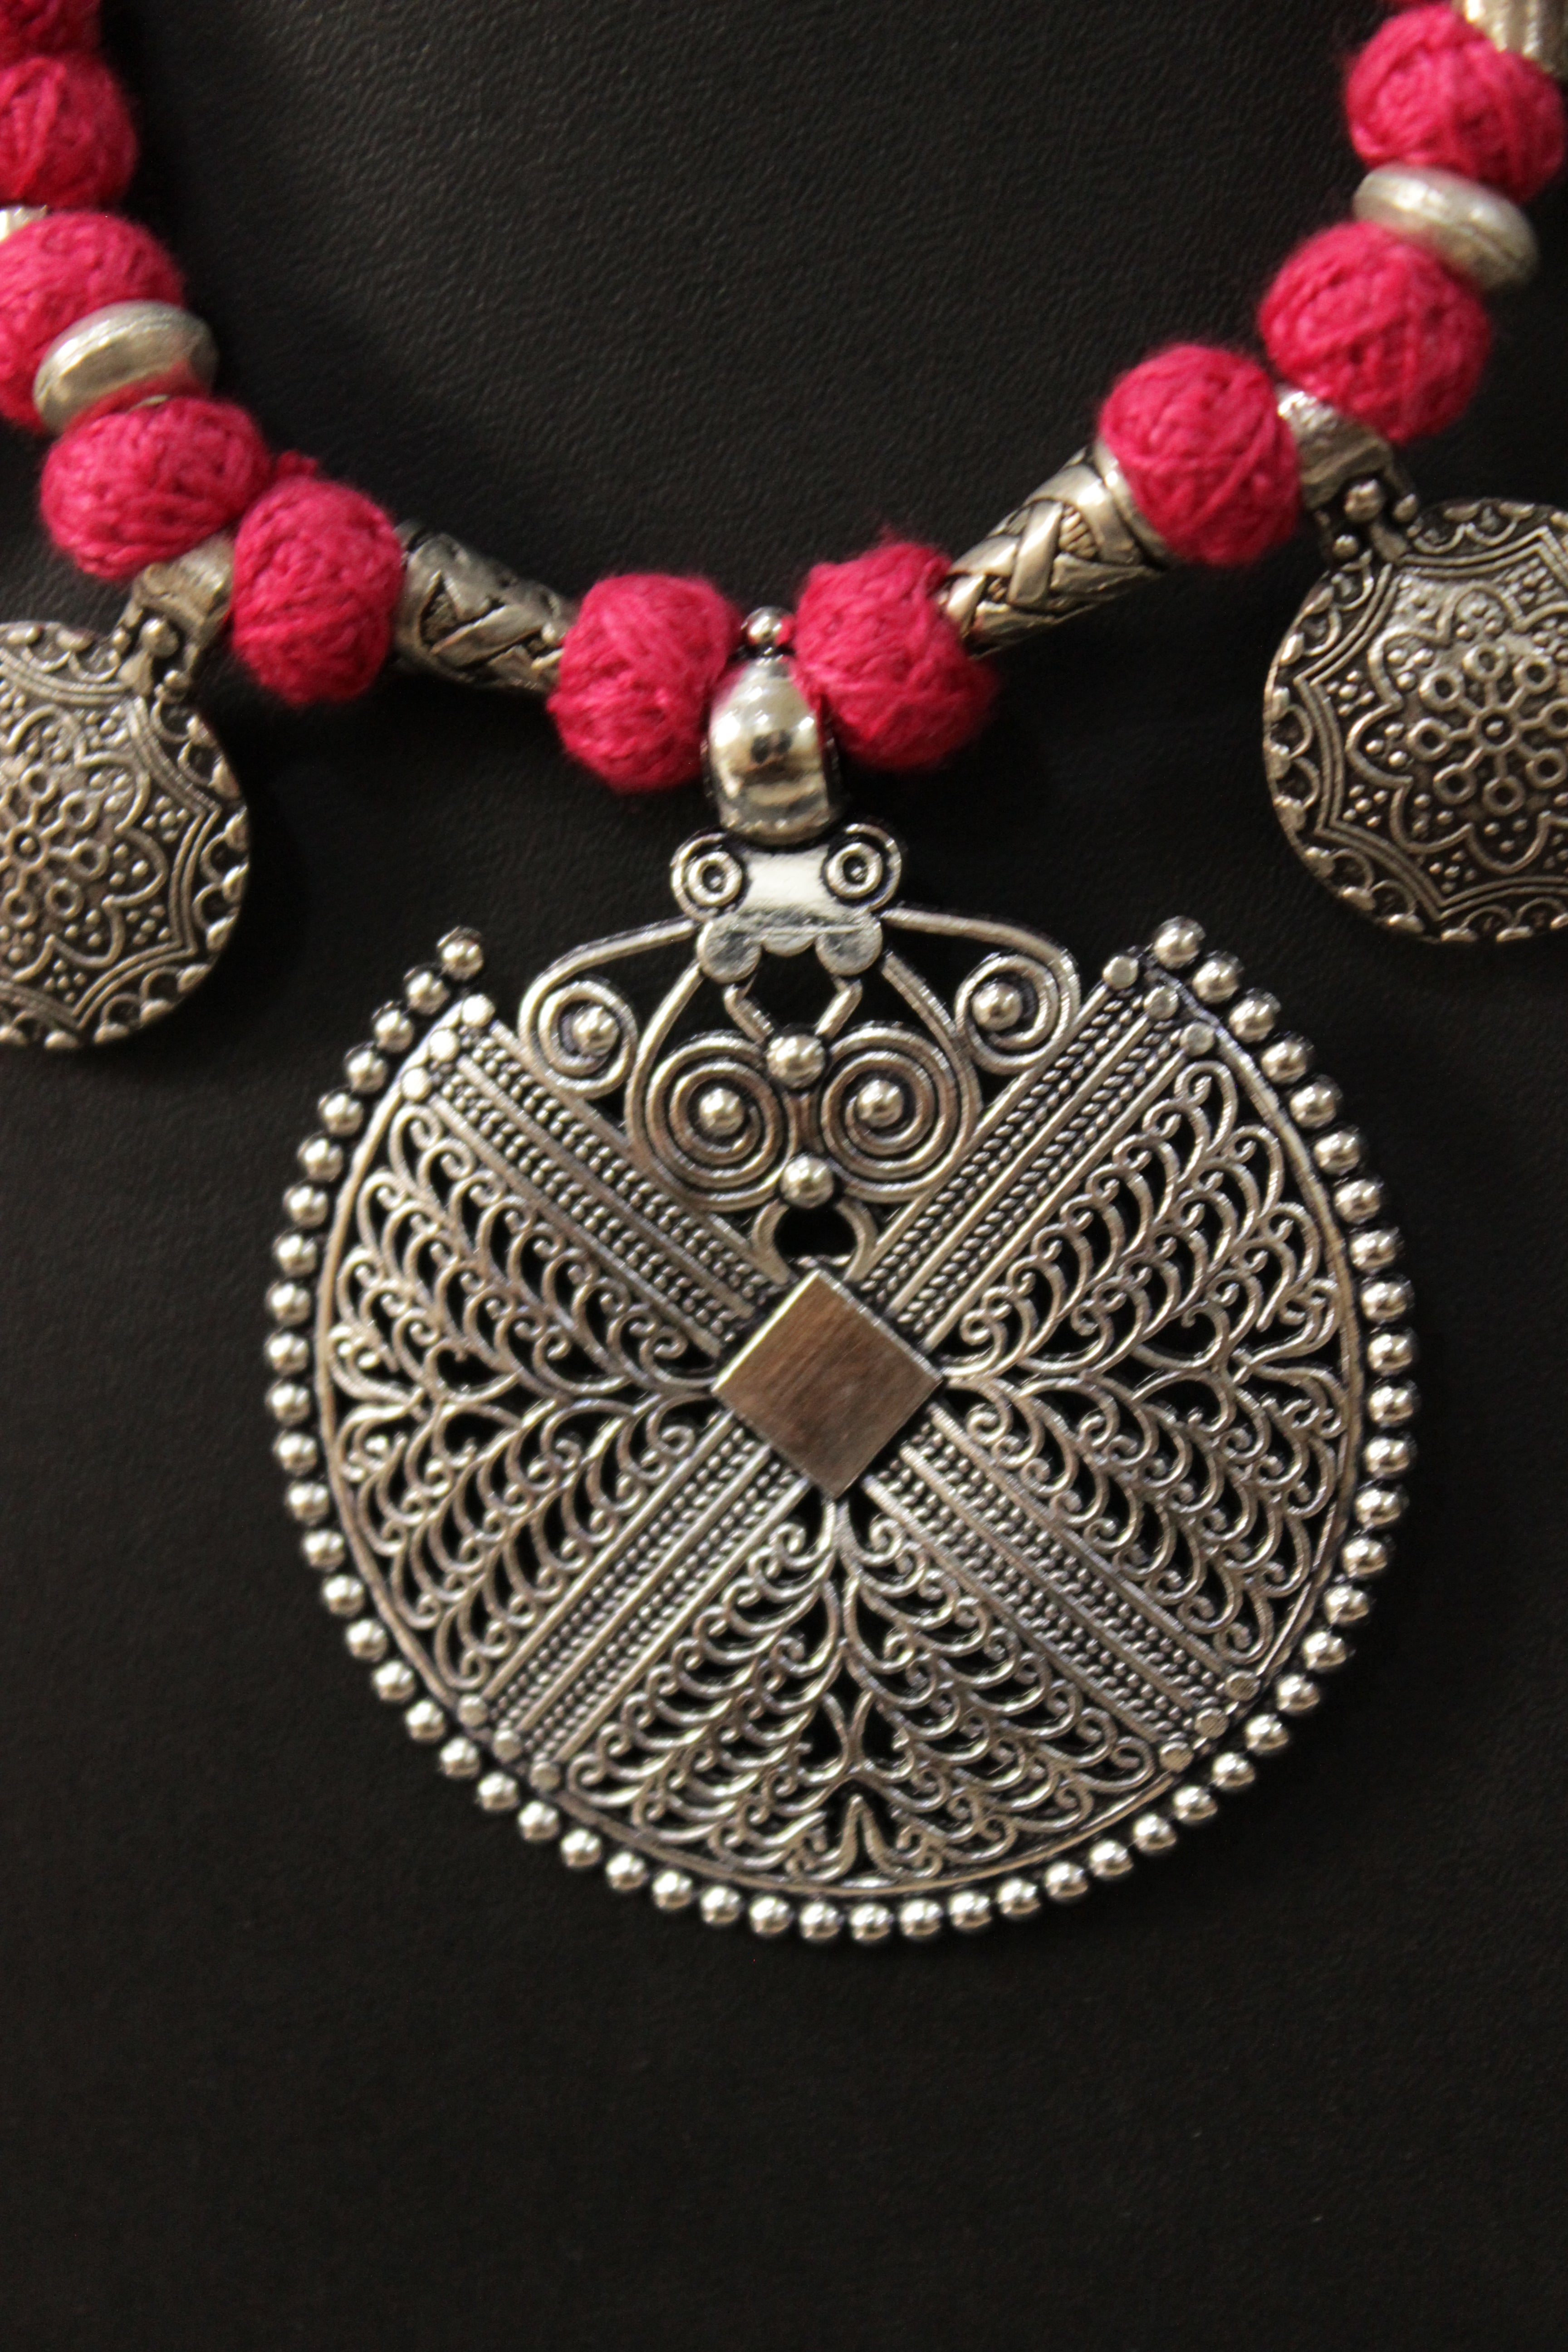 Intricately Detailed Metal Pendant and Charms Pink Thread Braided Necklace